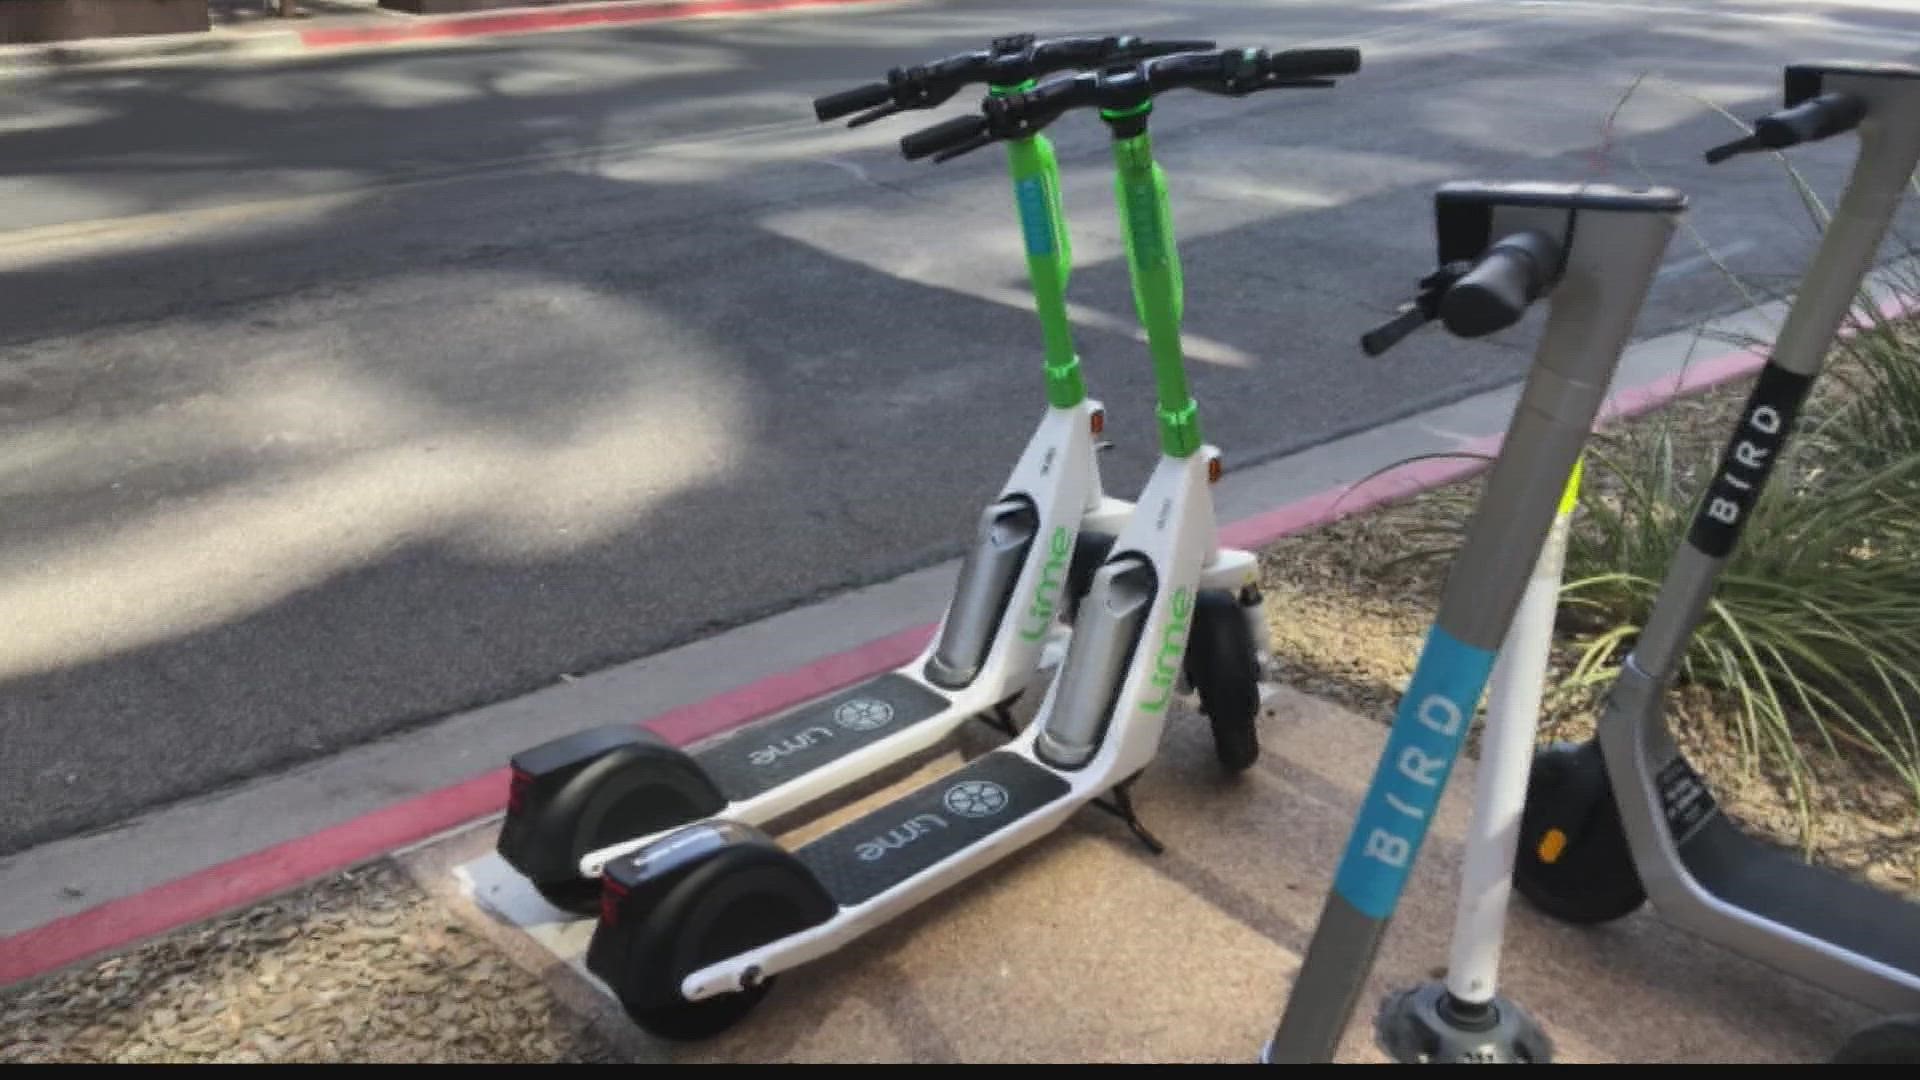 Regardless of your rider status, there are "do's and don’ts" when it comes to e-scooters, according to city officials.